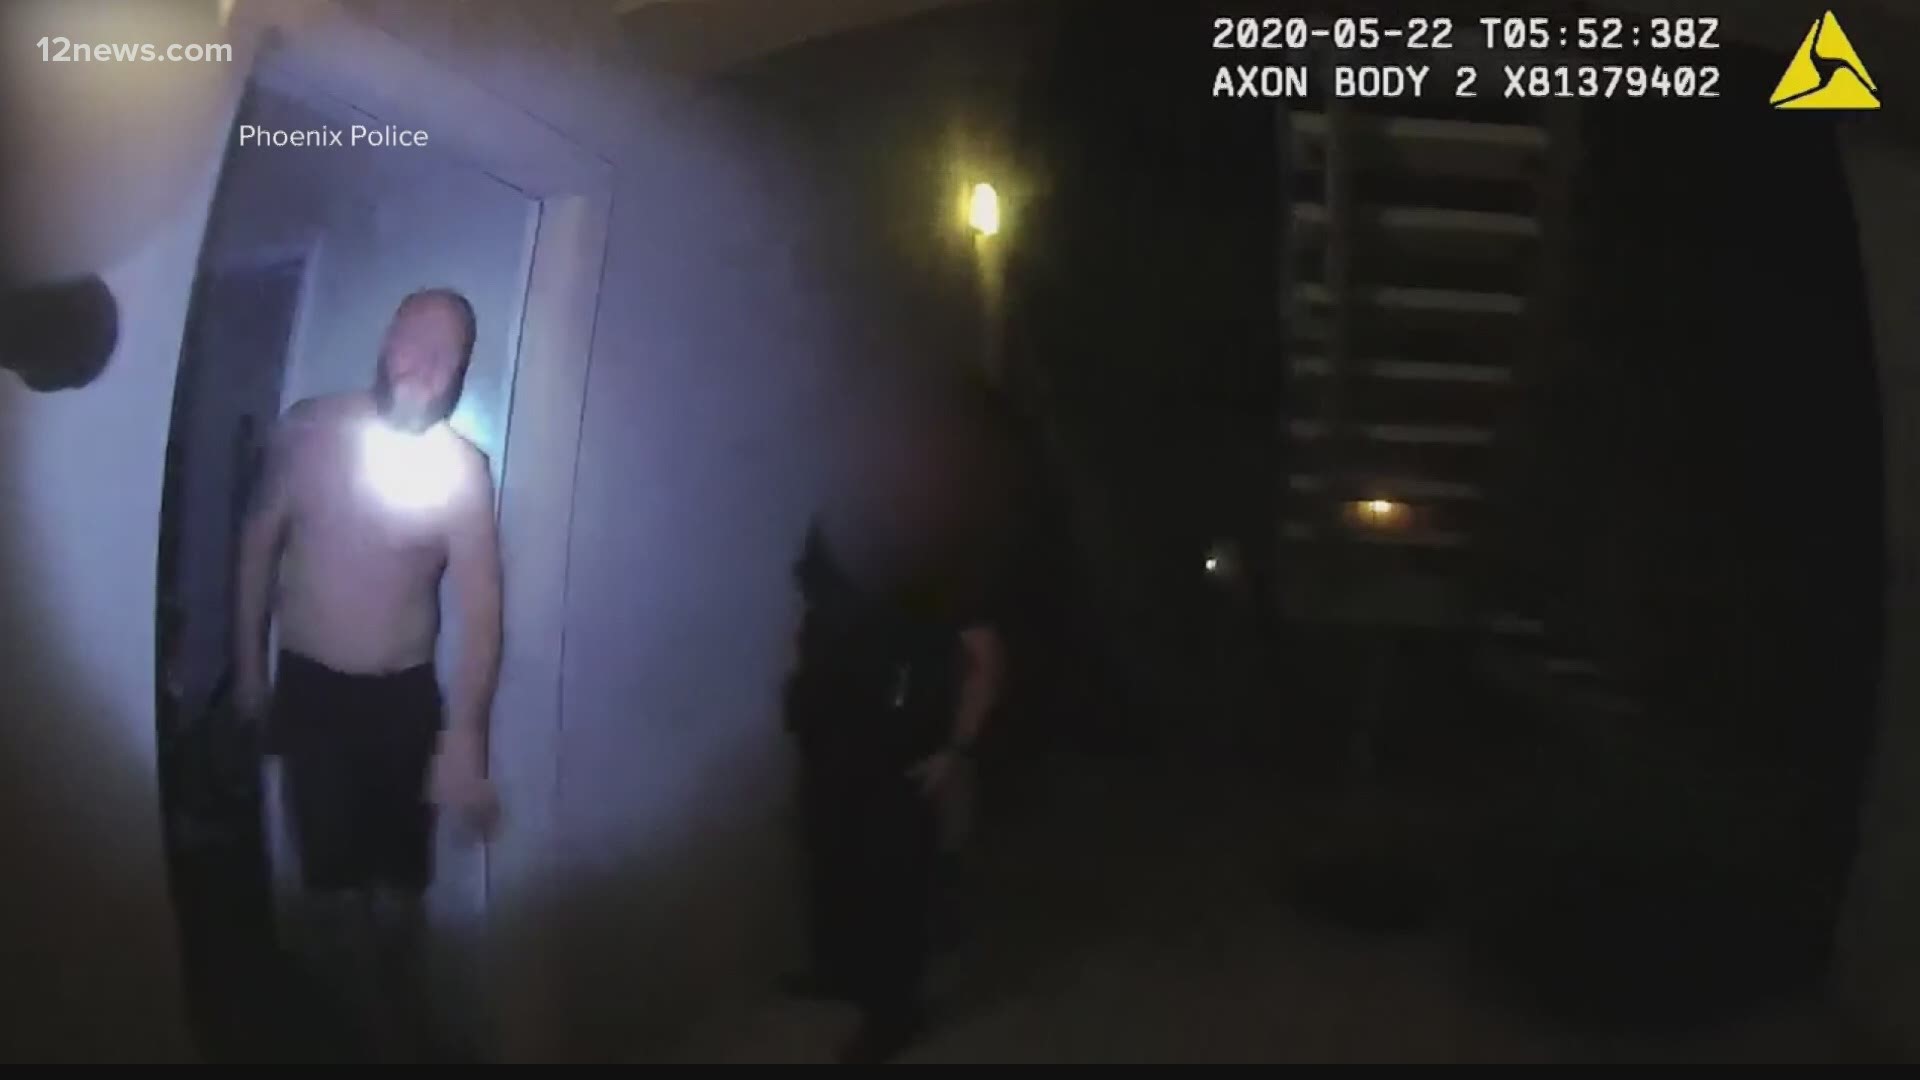 The Phoenix officer who shot and killed Ryan Whitaker one year ago is losing his job. Charges were not filed against Officer Jeff Cooke but he is being fired anyway.